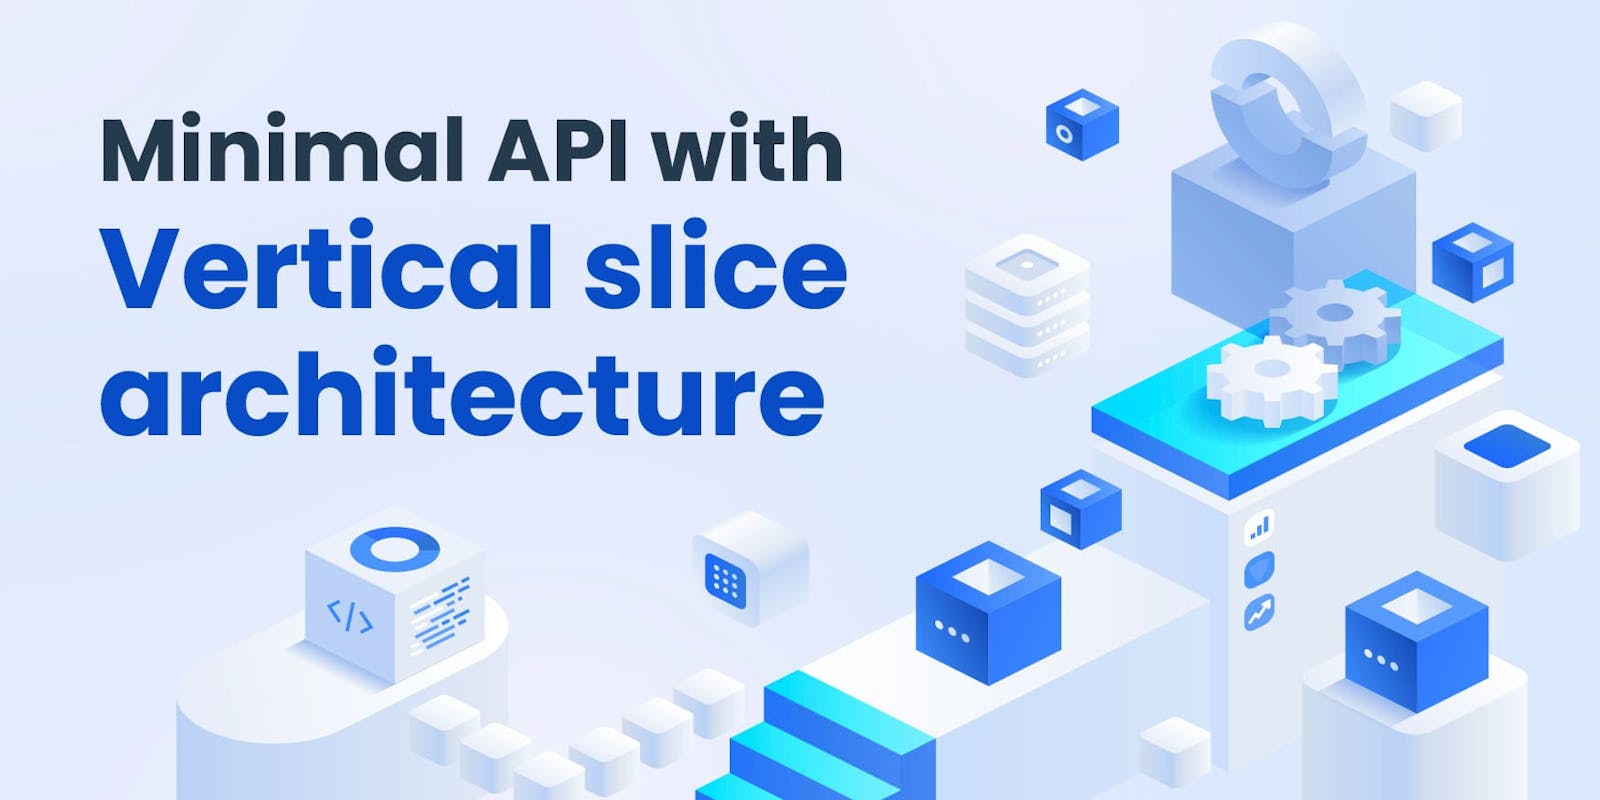 Minimal API with Vertical slice architecture